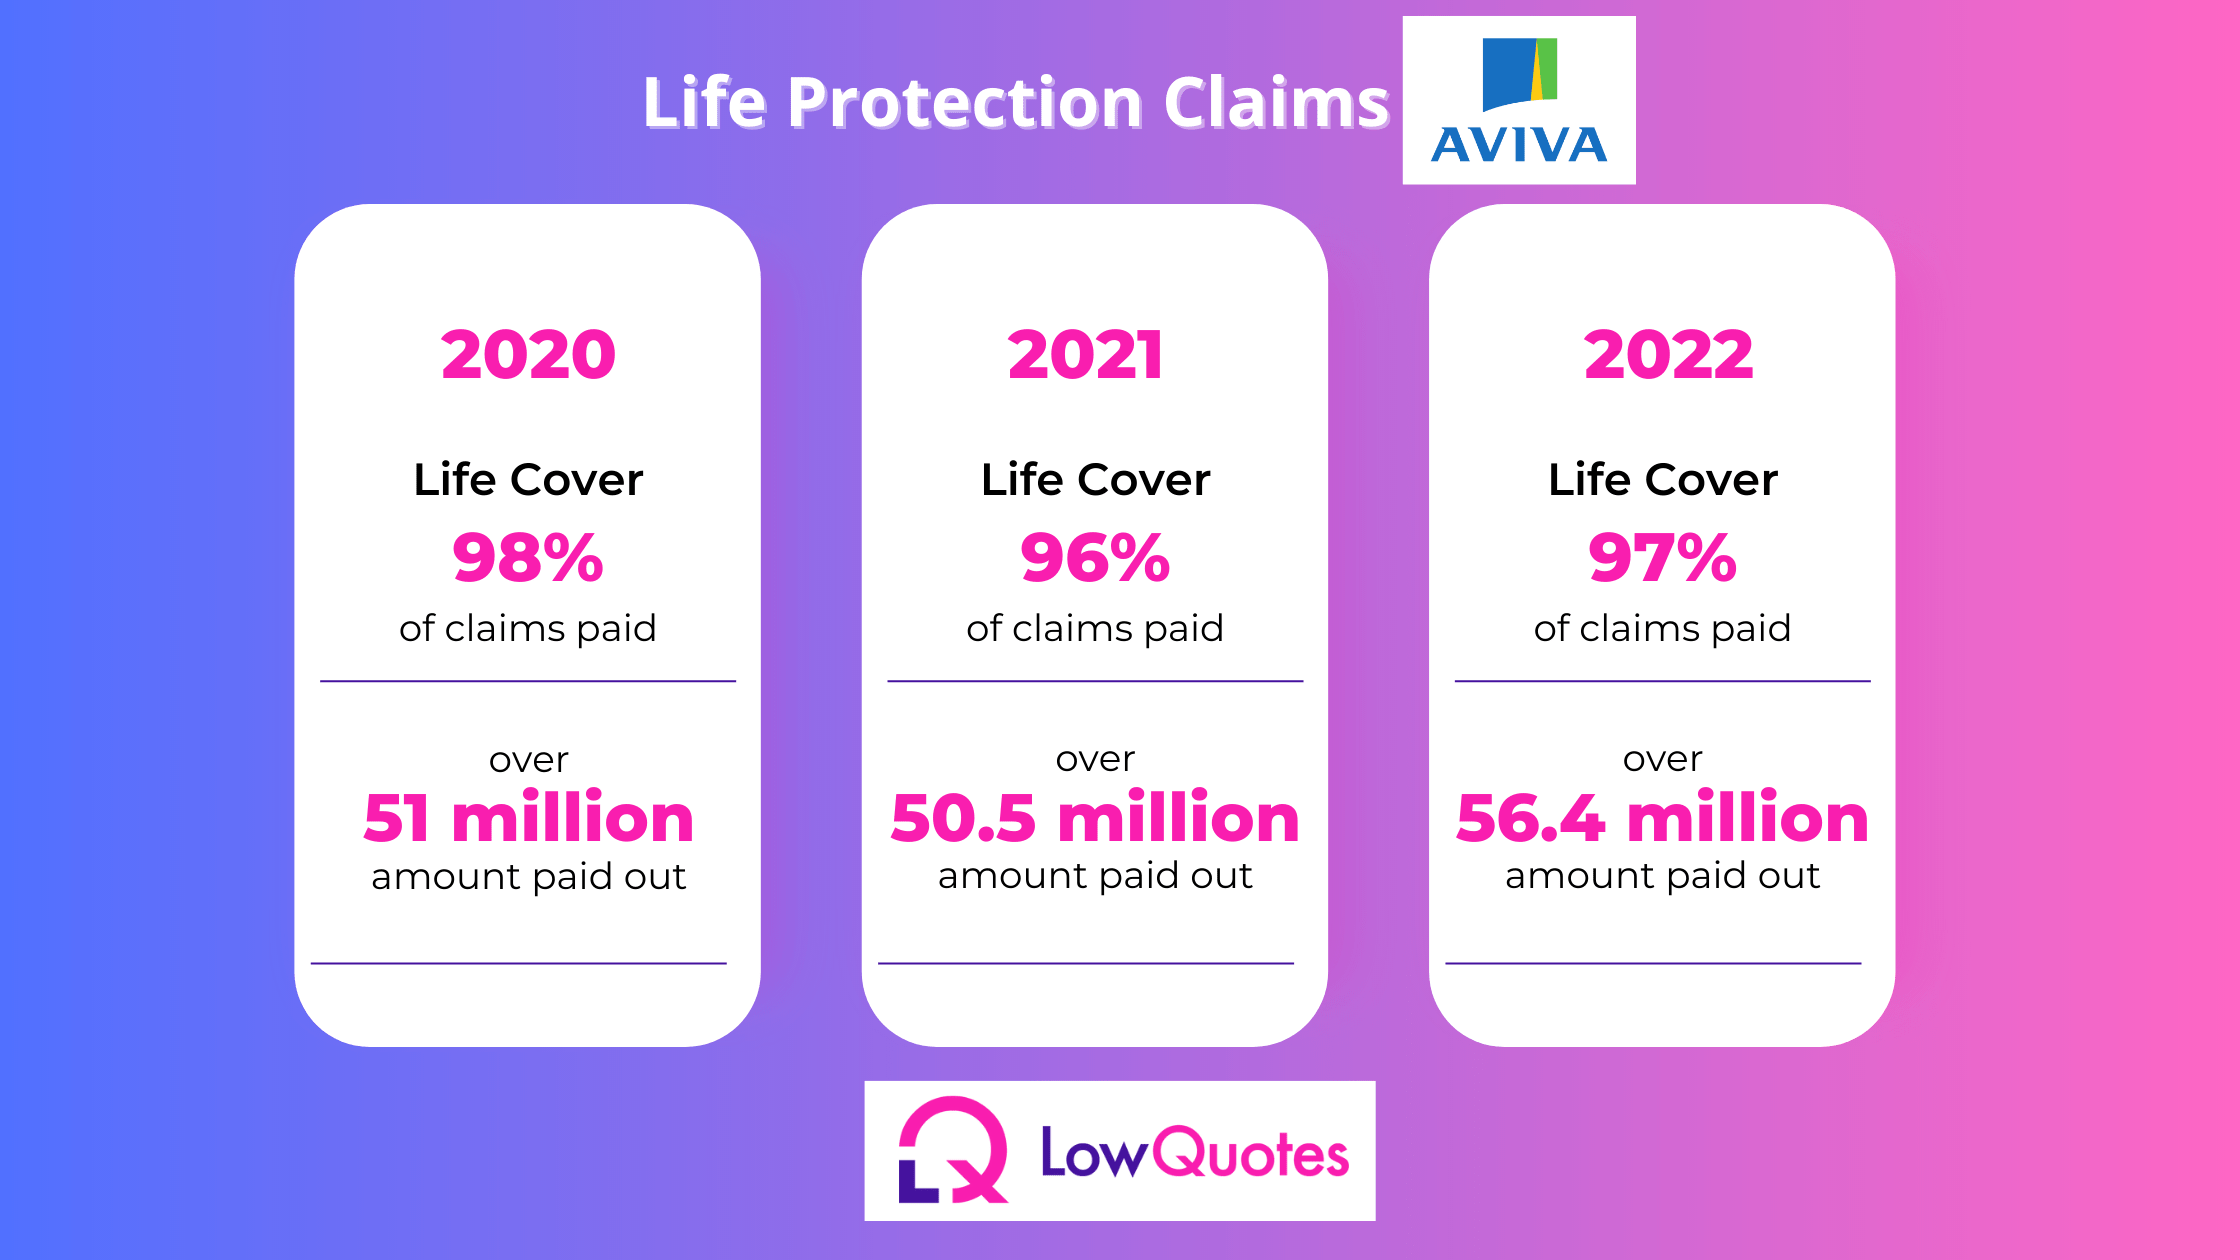 Life Protection Claims Aviva - 2020, 2021 and 2022